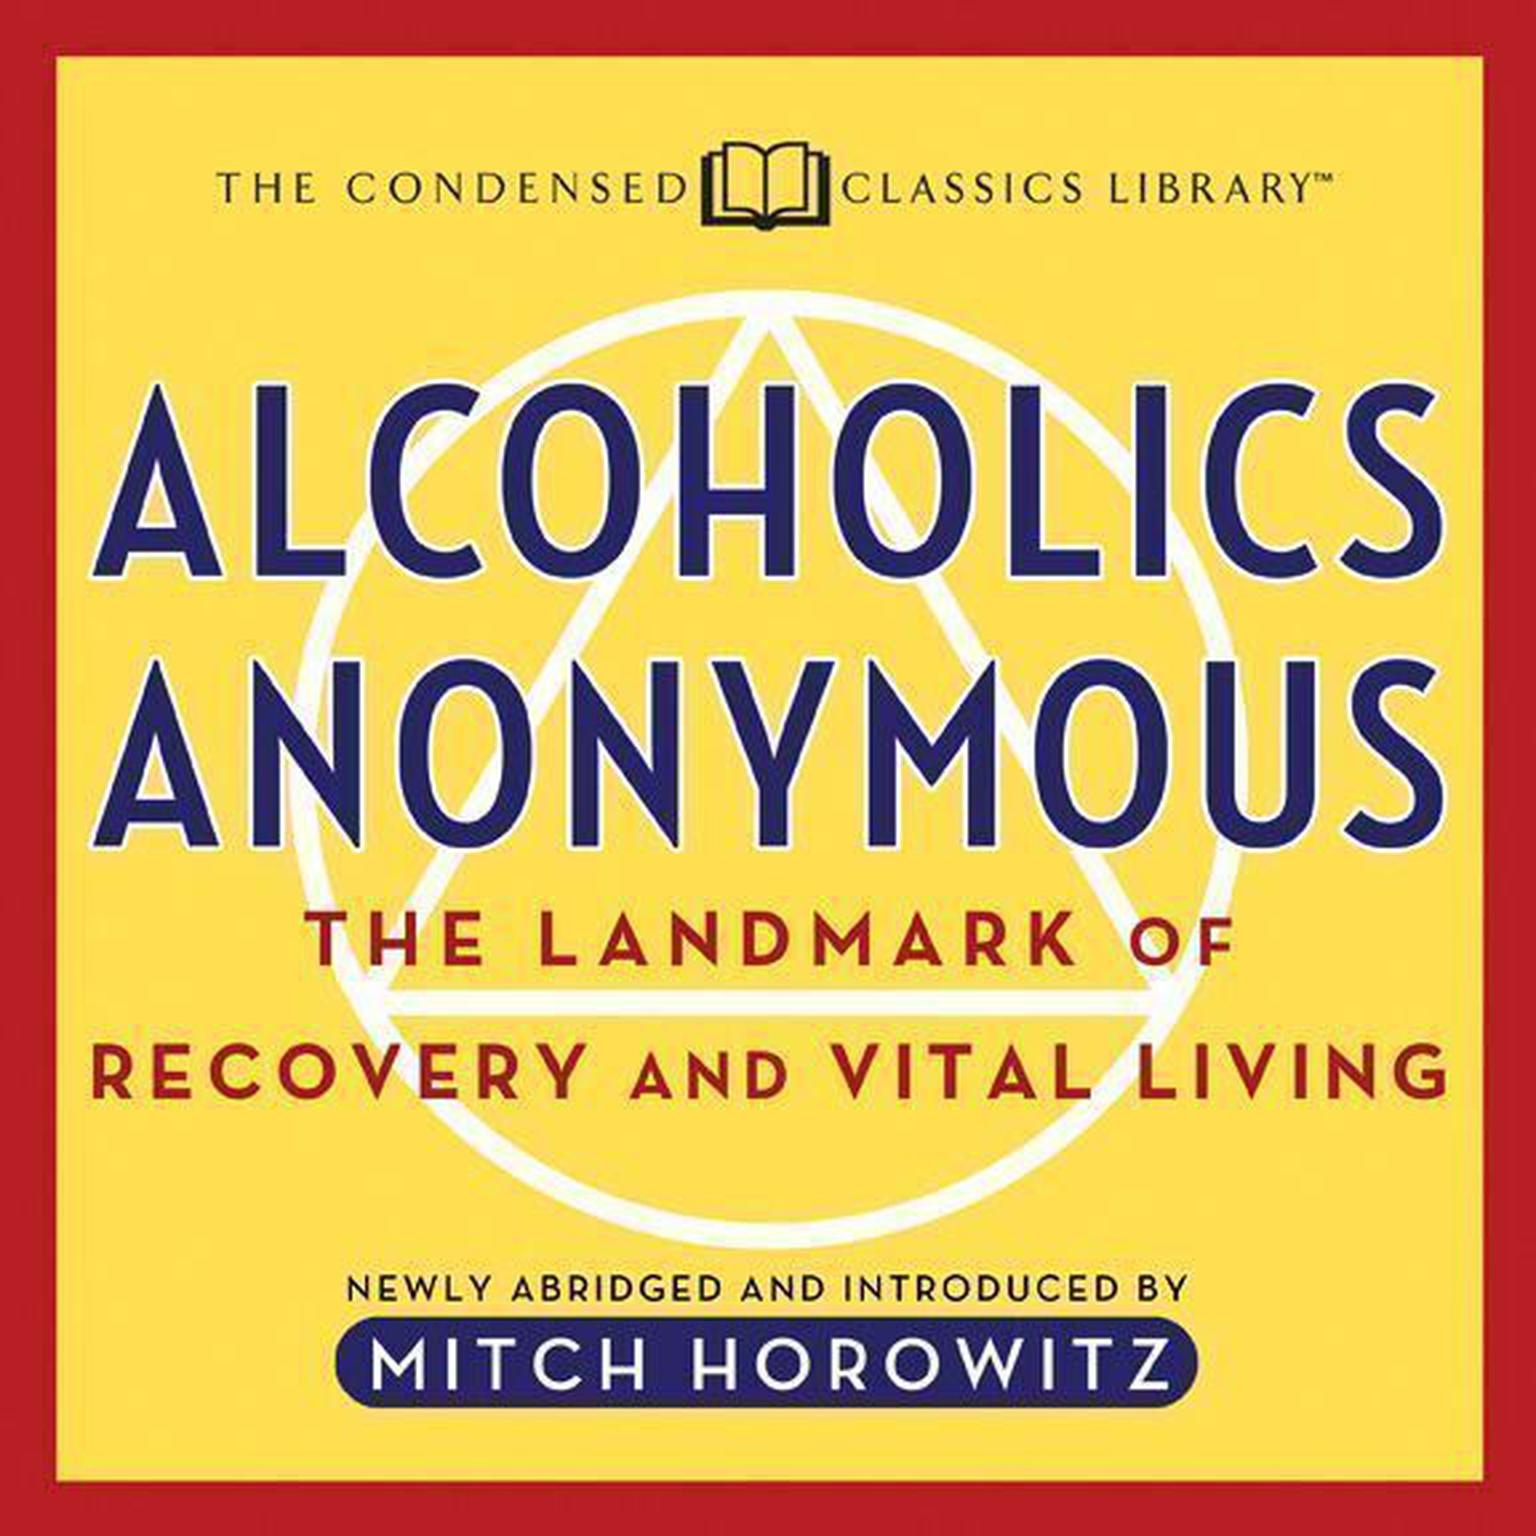 Alcoholics Anonymous (Abridged): The Landmark of Recovery and Vital Living Audiobook, by Mitch Horowitz